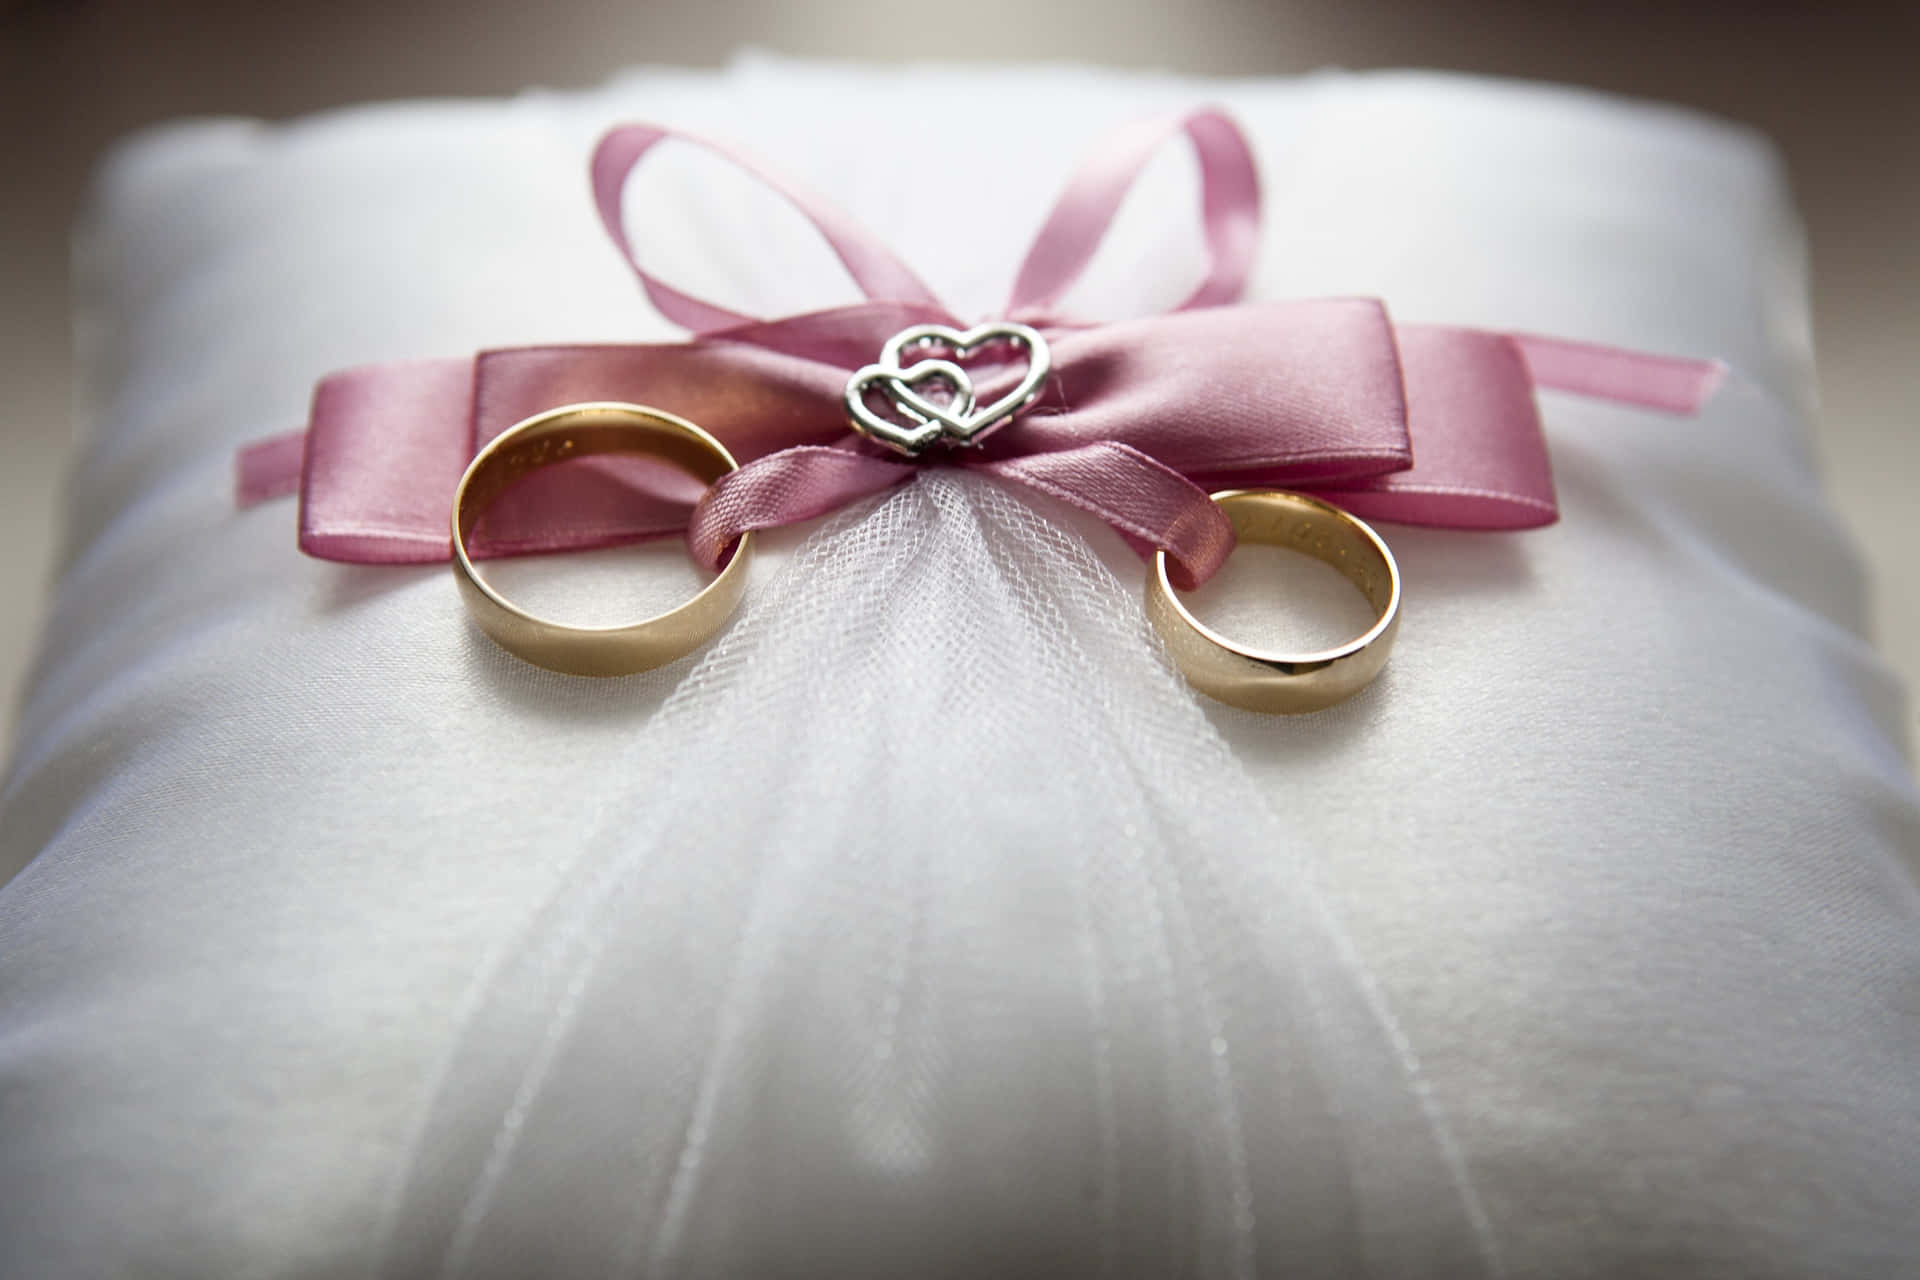 Love is forever and so are these timeless wedding rings